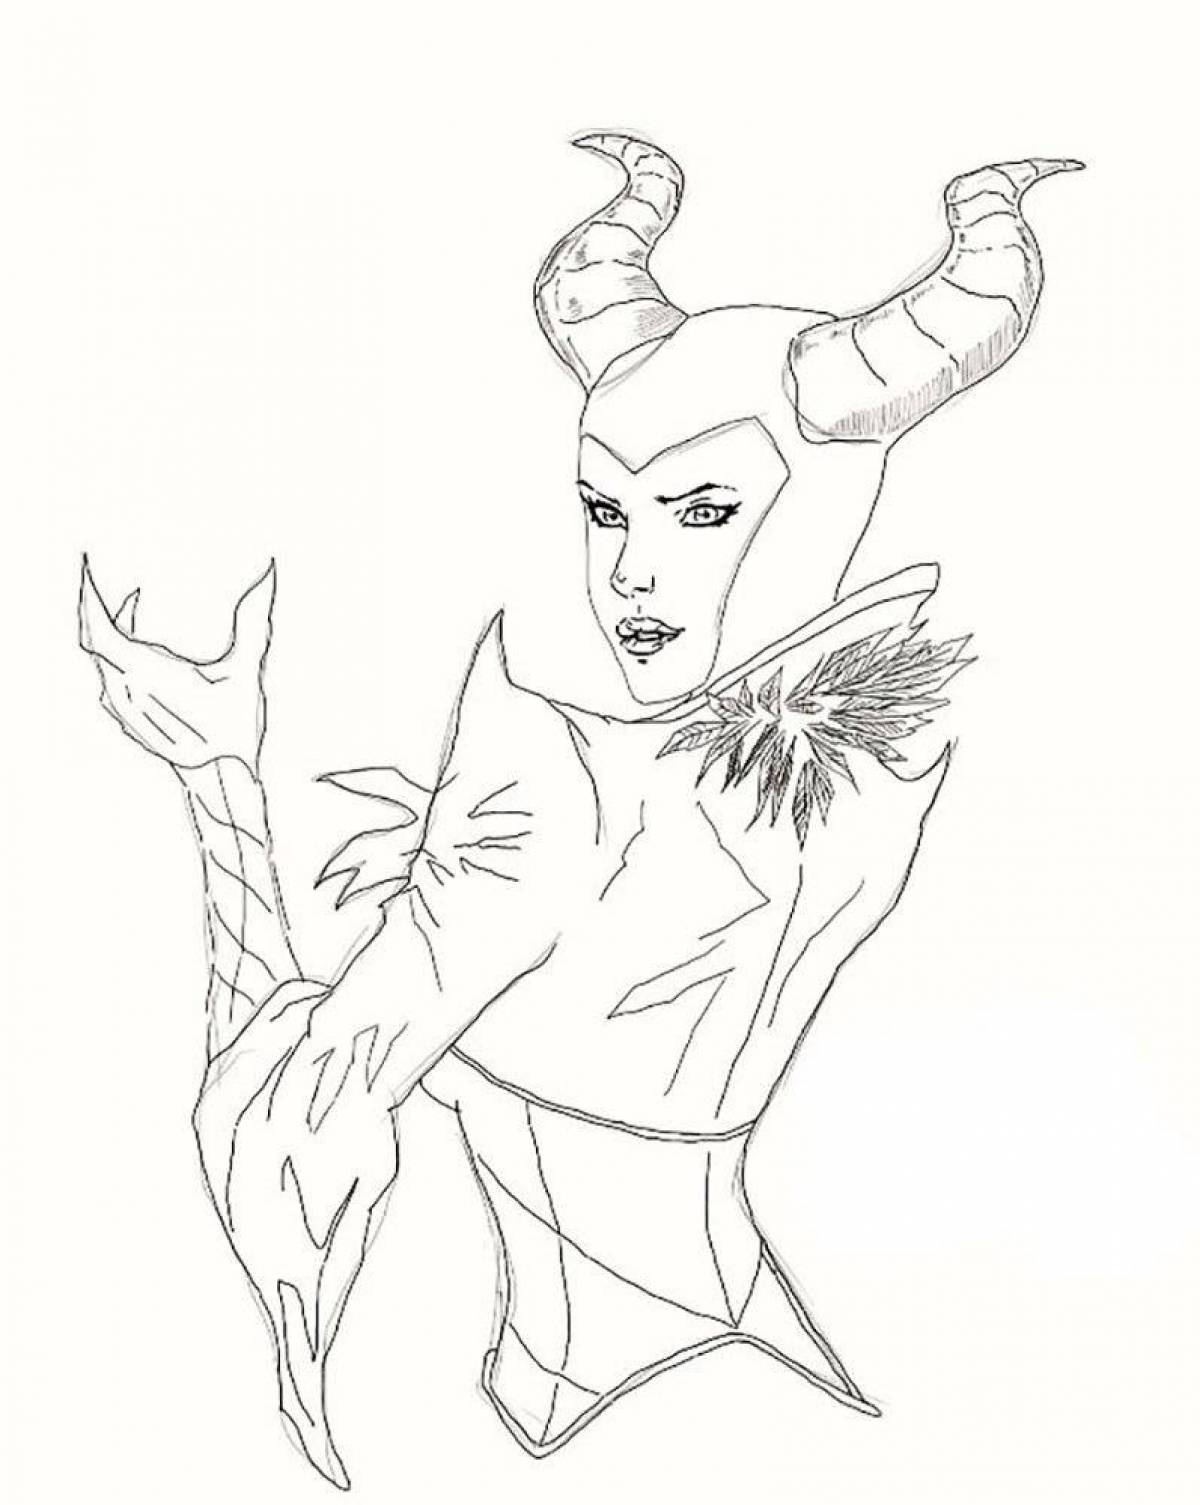 Majestic maleficent coloring page